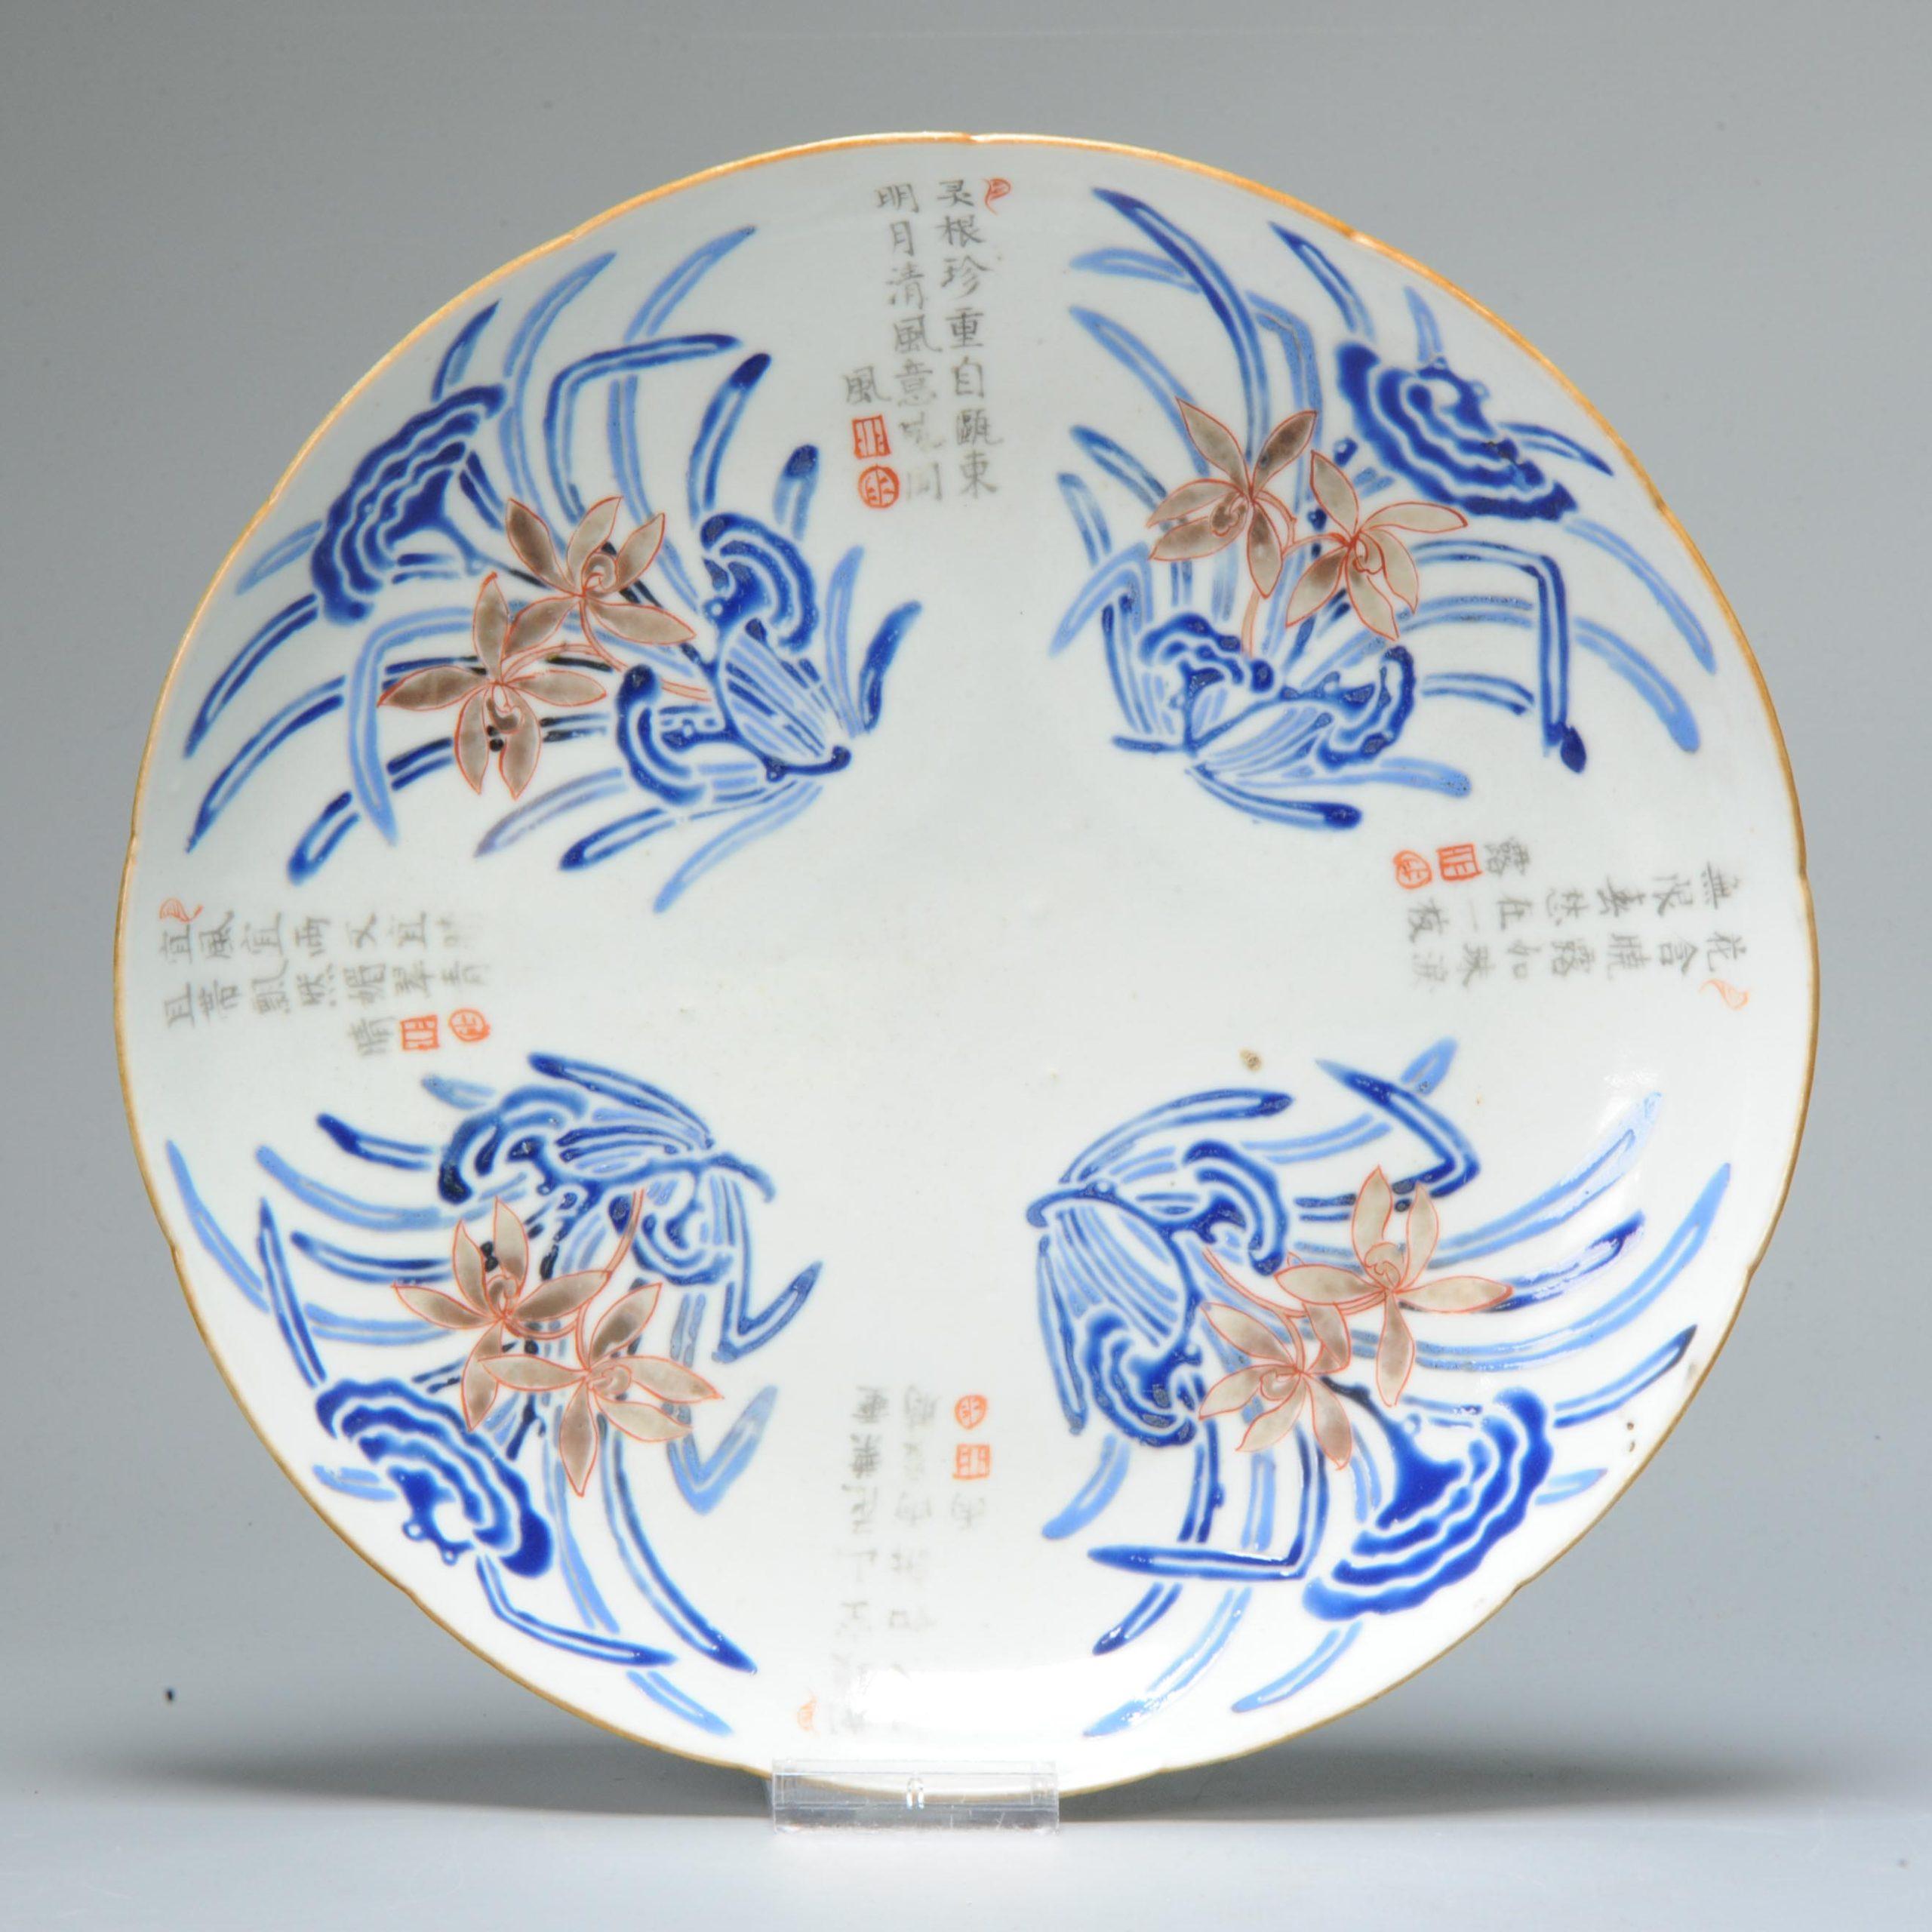 A lovely Qianlong rooster plate. With a very unsual scene of the Roosters hunting a grasshopper. Very nice.

Condition
some chips/frits to rim, chips mainly visible underside rim. Size 221x27mm high
Period
18th century Qing (1661 - 1912).